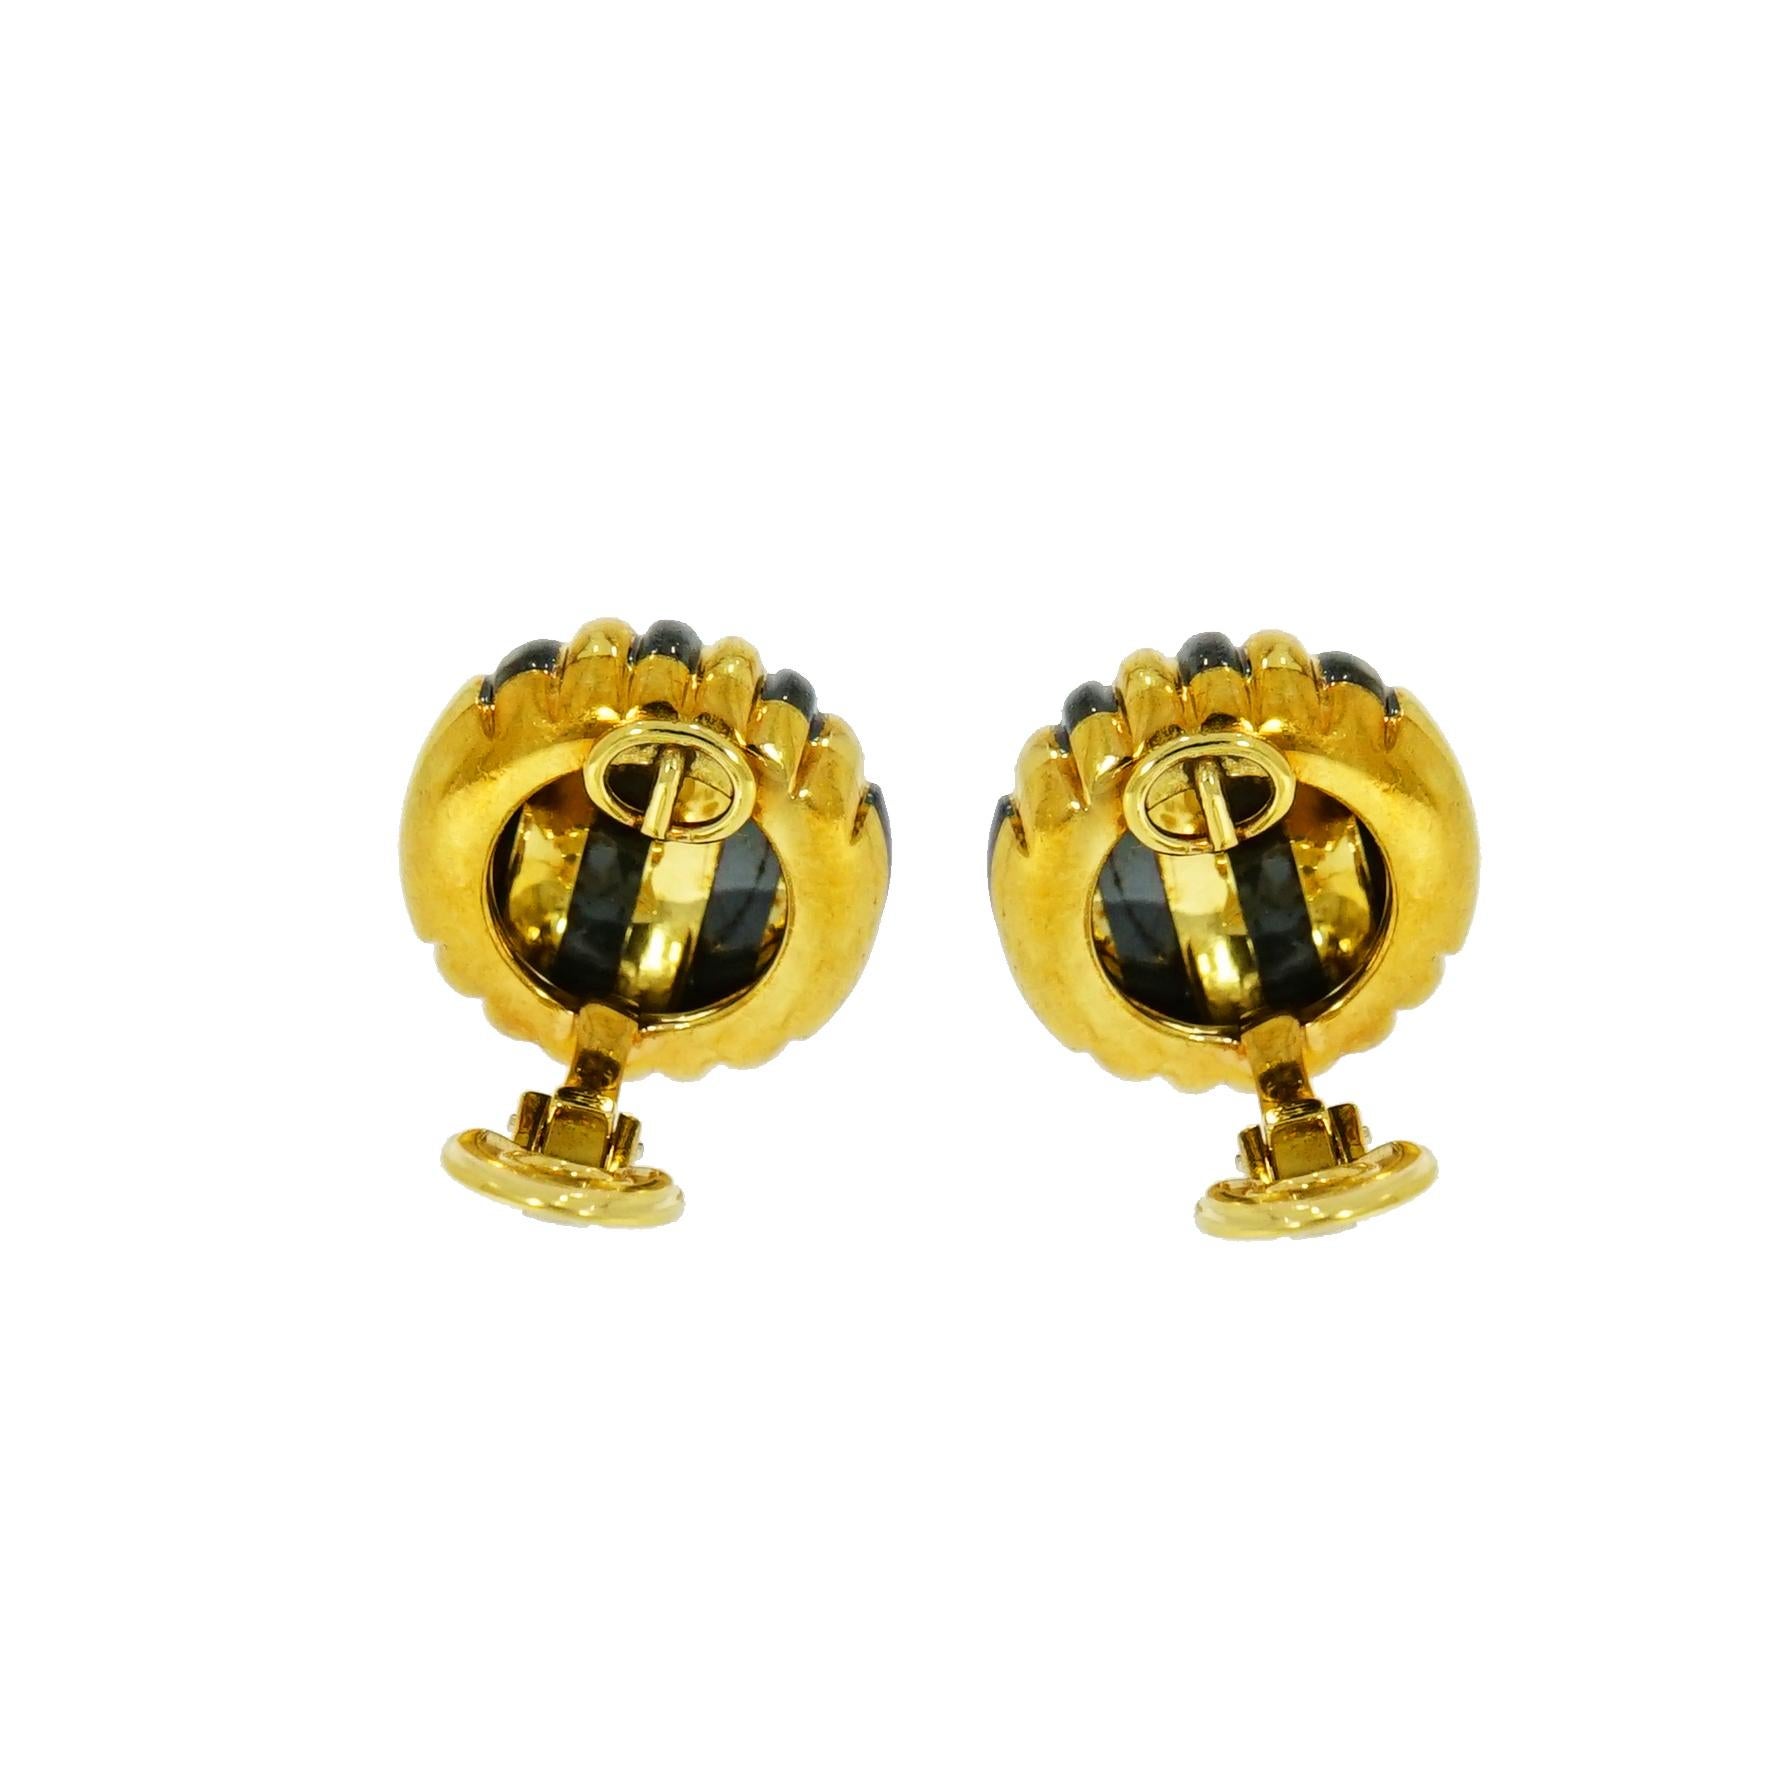 This striped Yellow Gold Non pierced Clip-on Earrings designed by Faraone.
Crafted in 18k Yellow Gold, solid and superb craftsmanship.
Measures 19mm in diameter and weighs 23.95 grams.